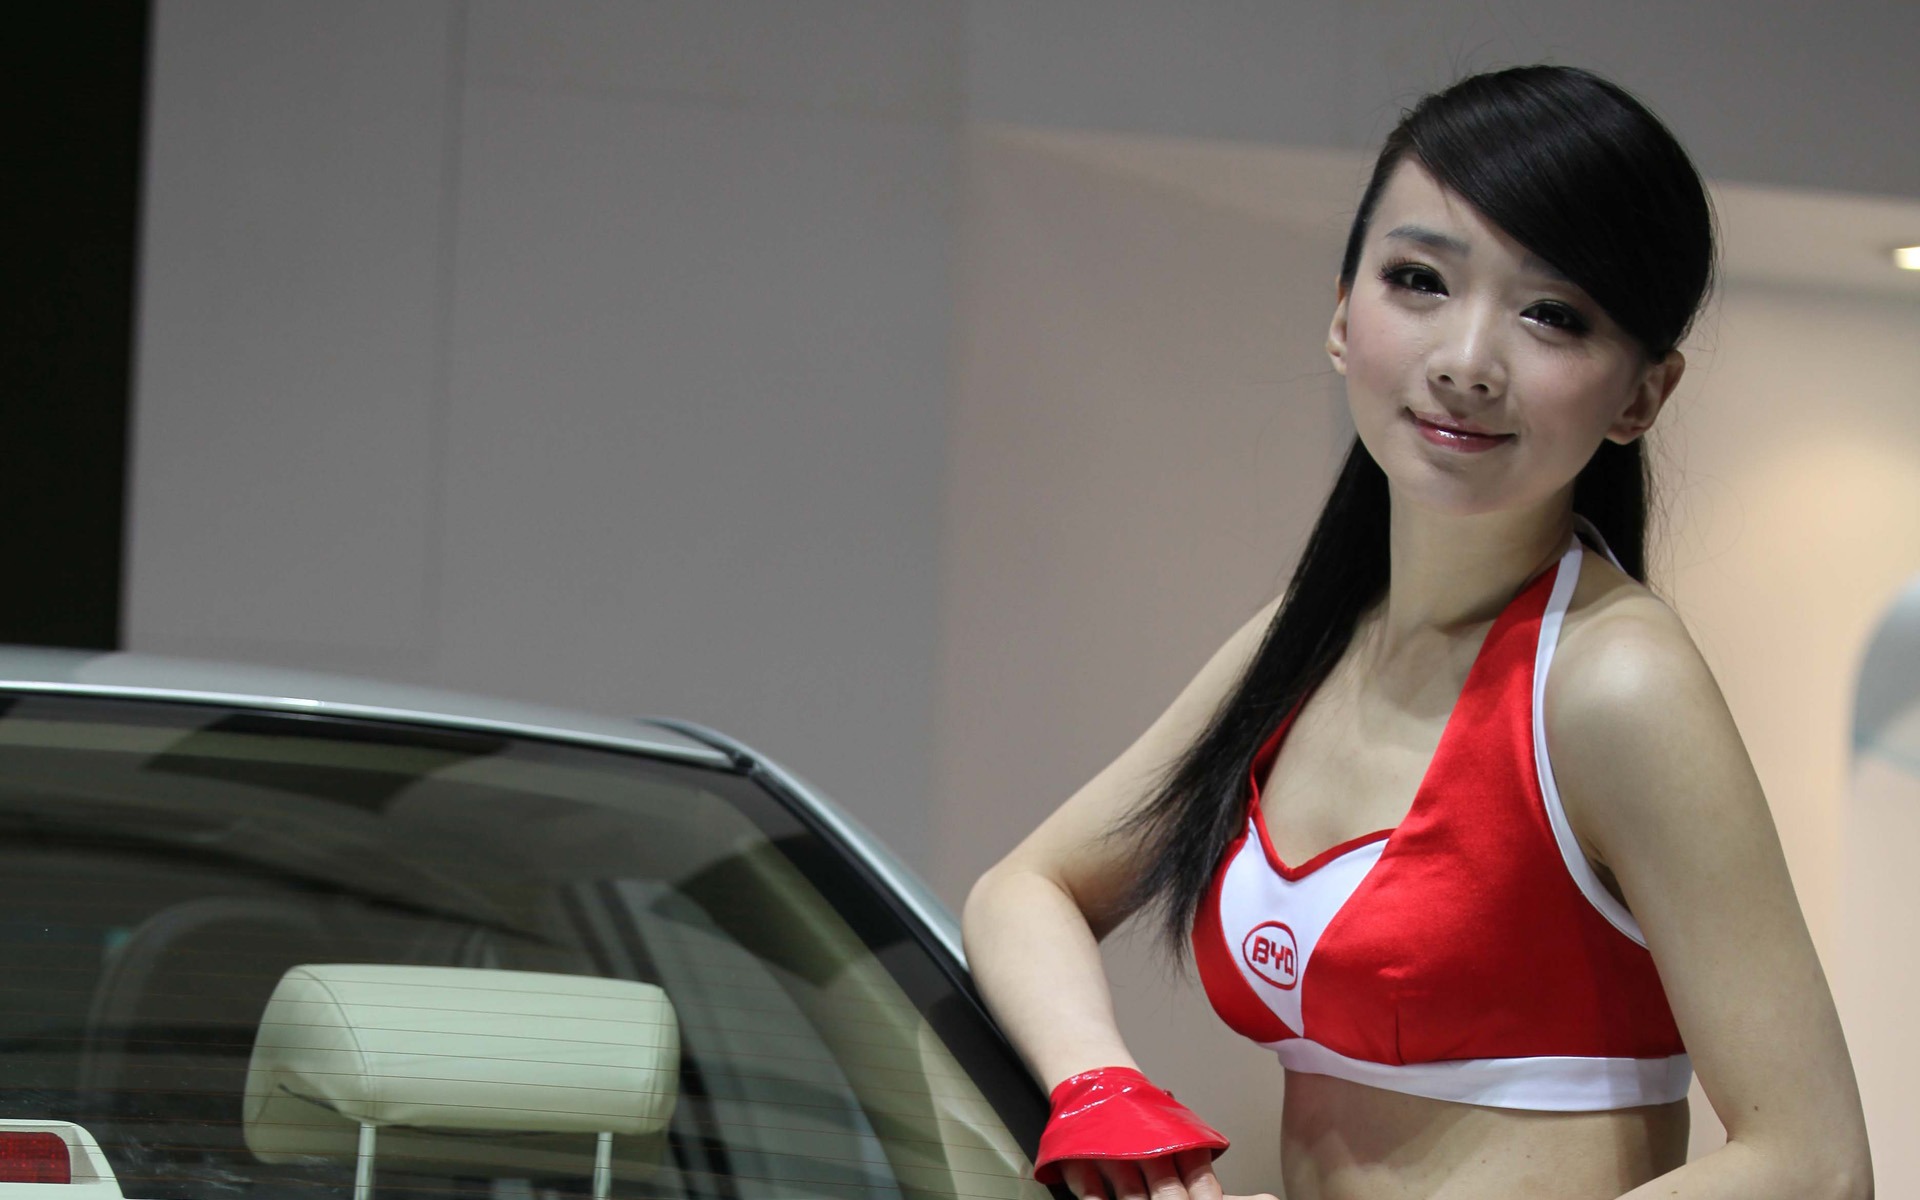 2010 Beijing International Auto Show beauty (1) (the wind chasing the clouds works) #20 - 1920x1200